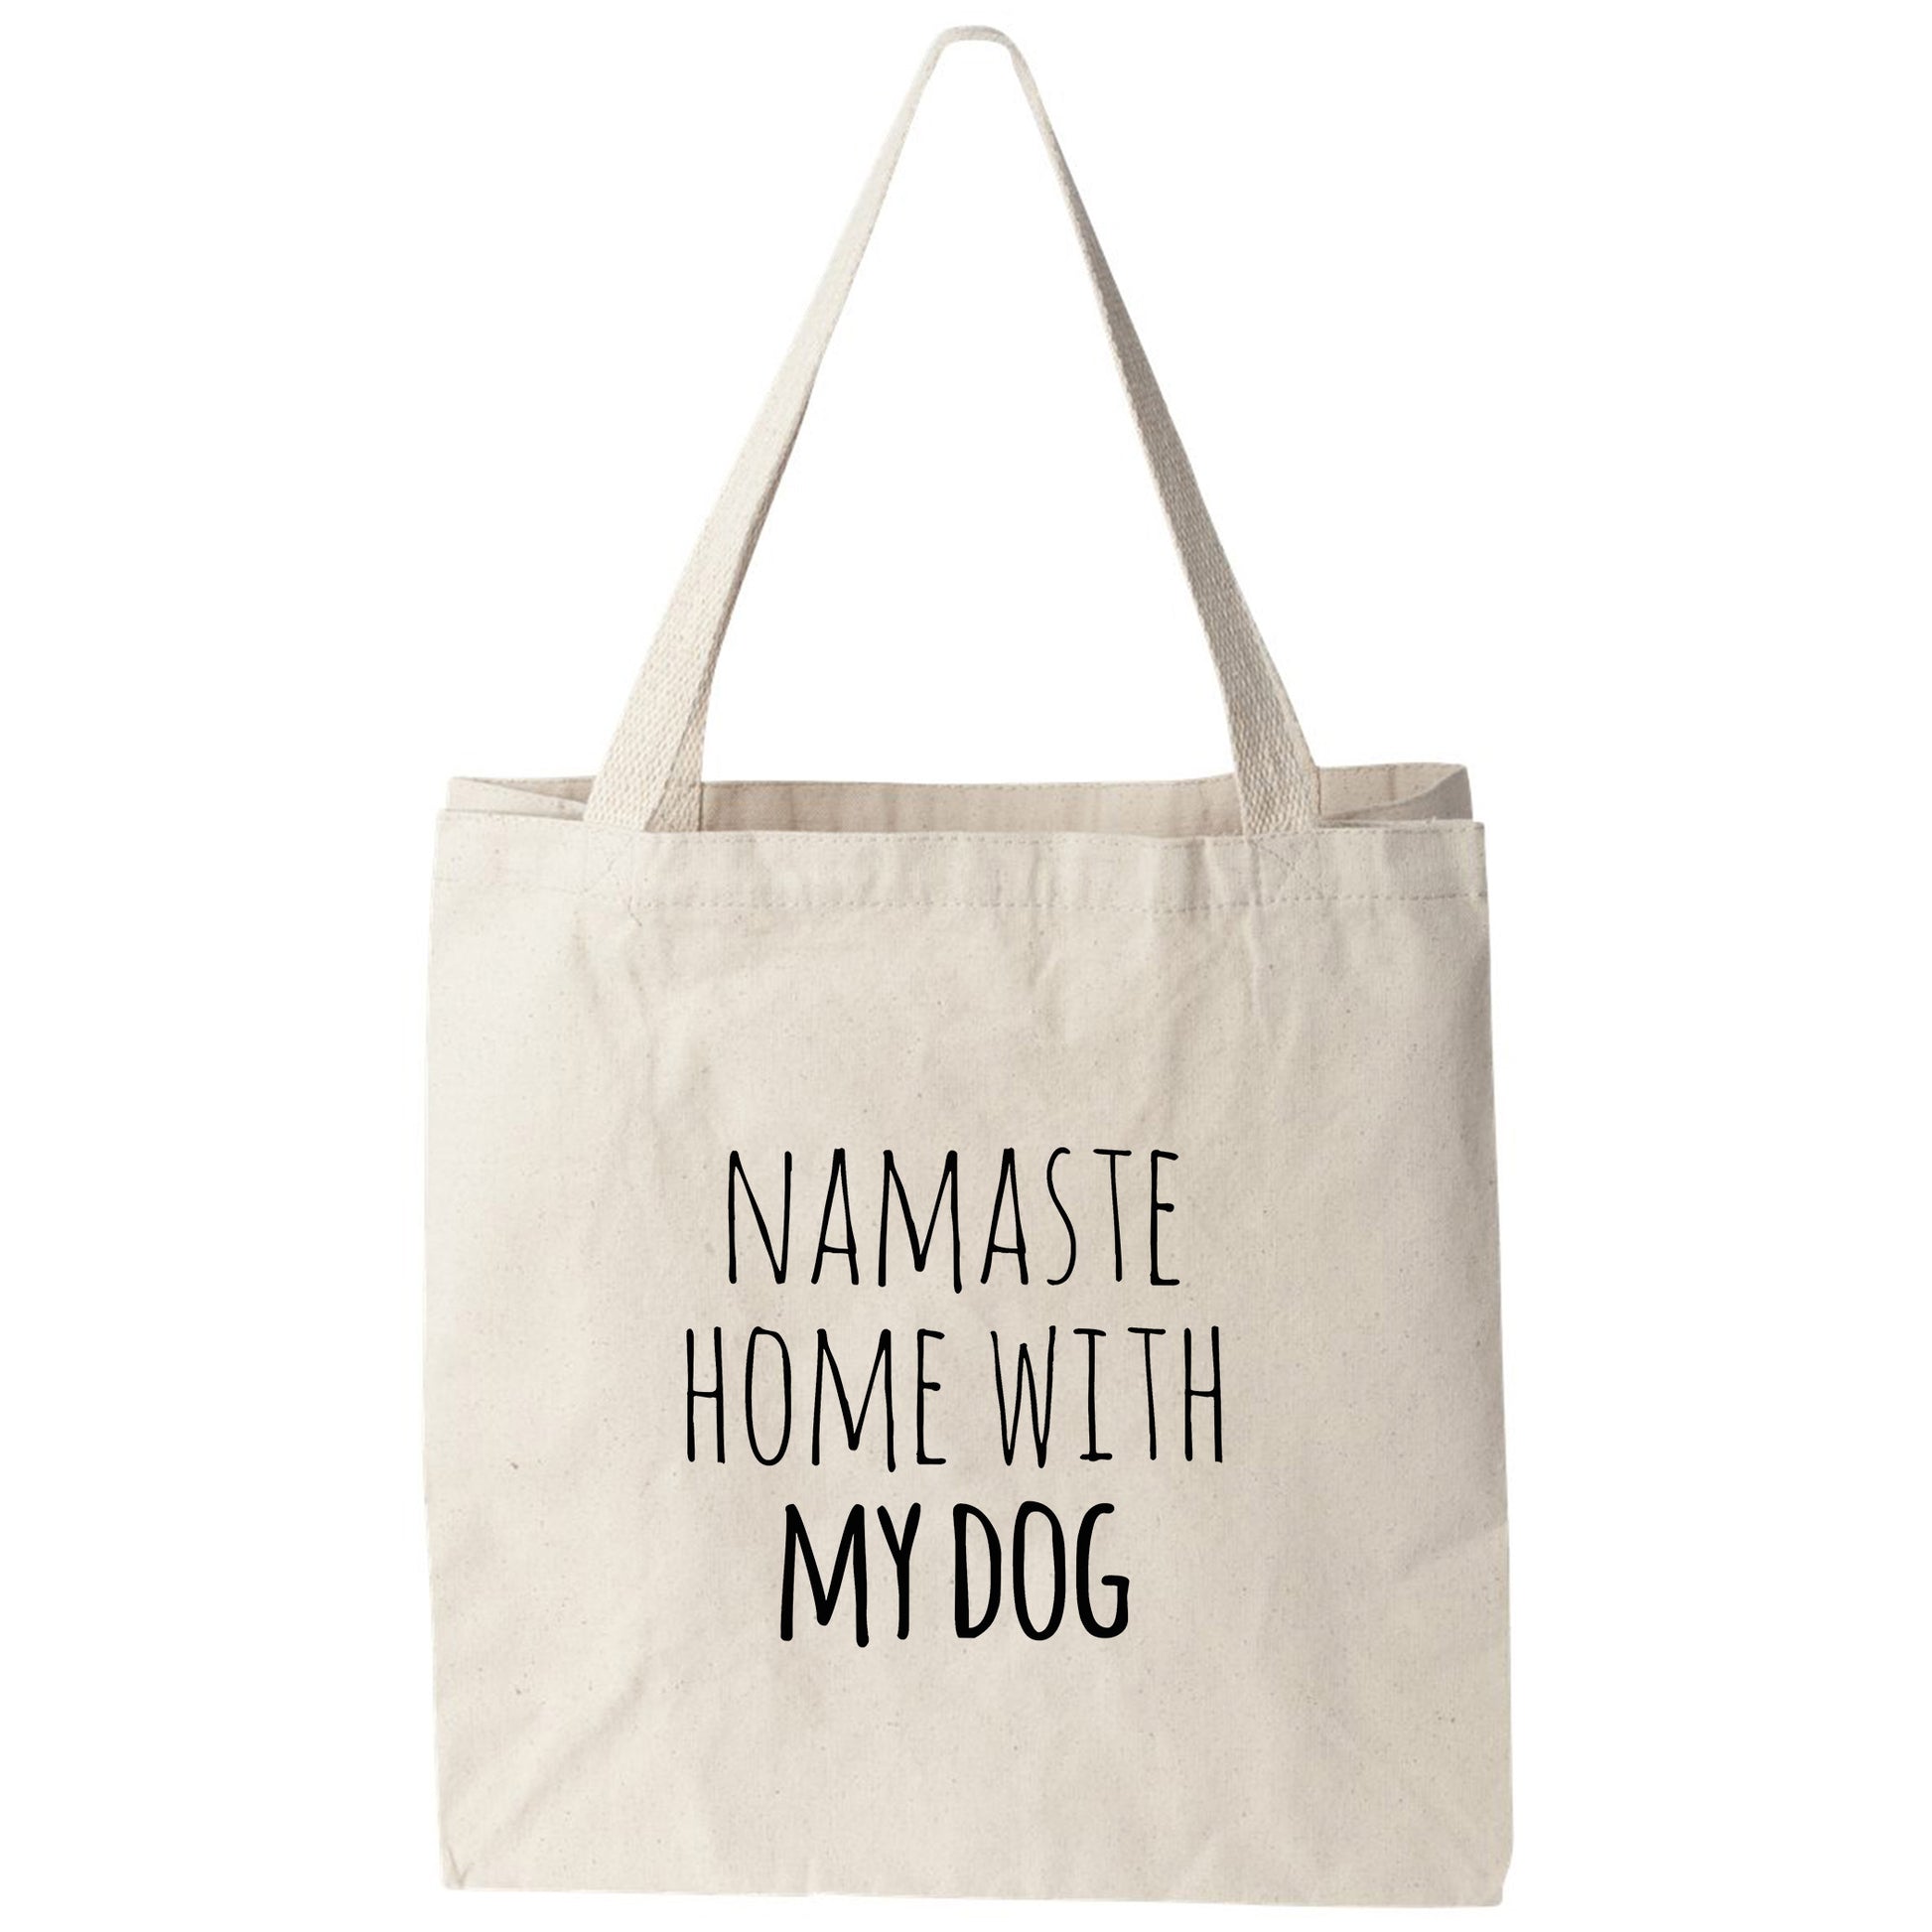 a tote bag that says namaste home with my dog